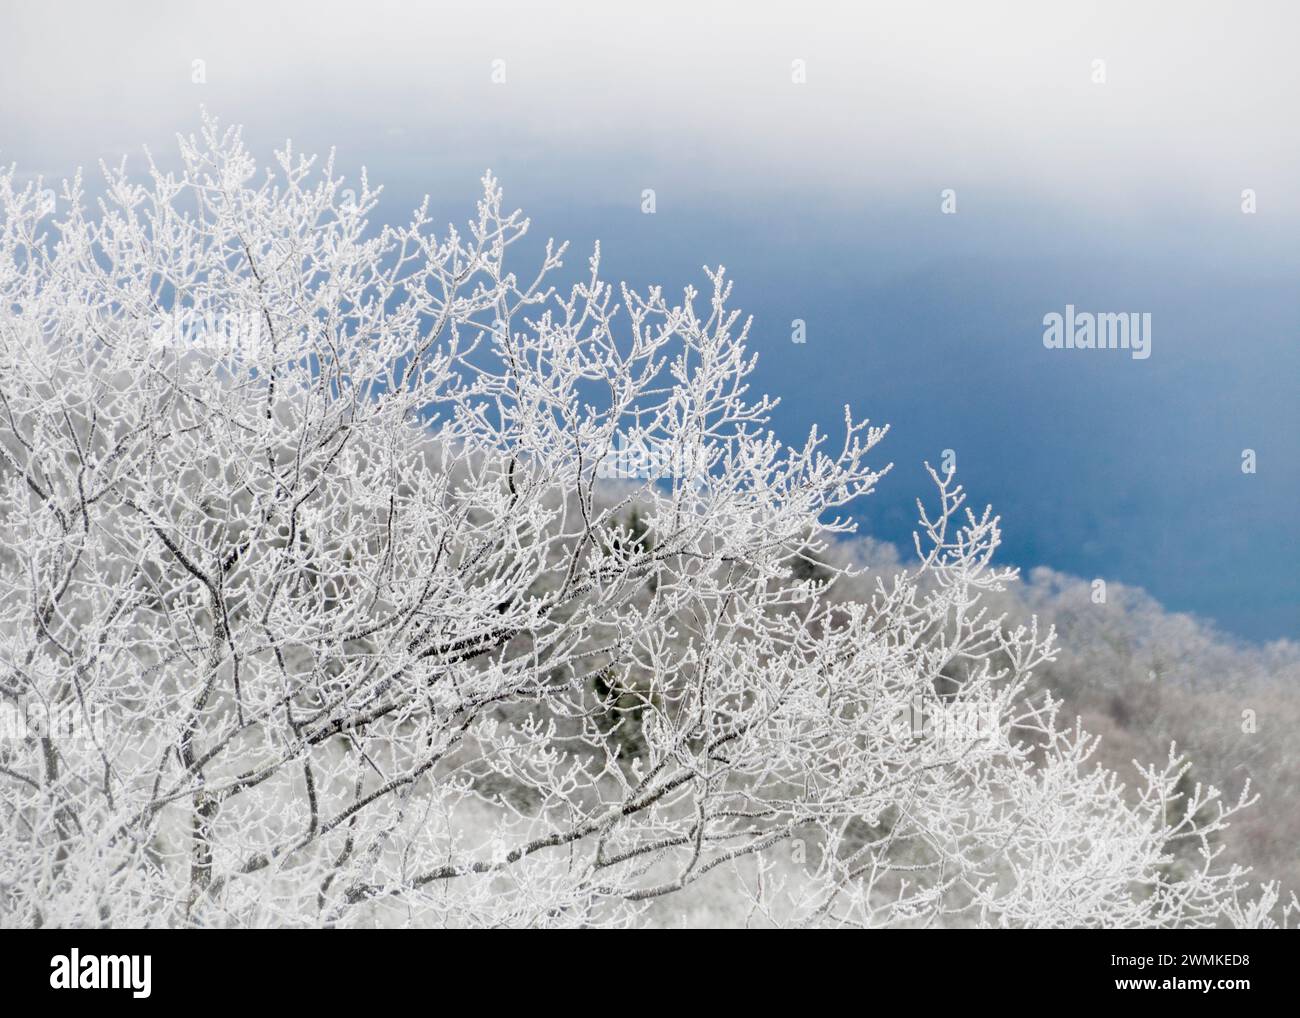 Close-up detail of rime ice covers trees; Fairview, North Carolina, United States of America Stock Photo